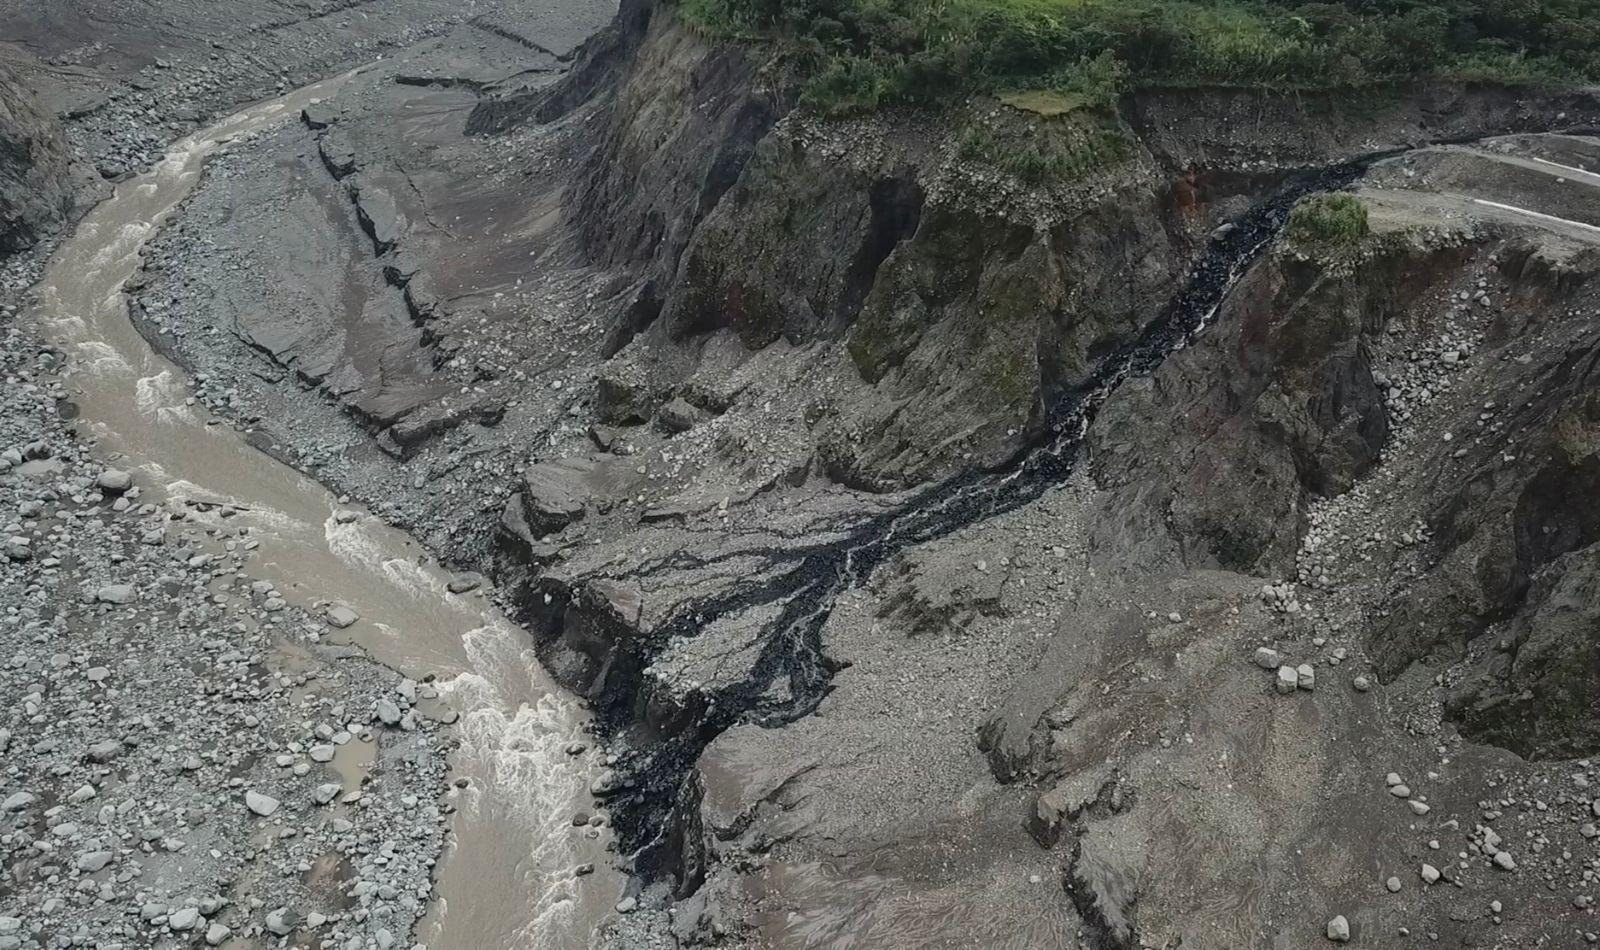 A major oil spill threatens hundreds of Indigenous communities who live along the Coca River that leads into Ecuador's Amazon. 